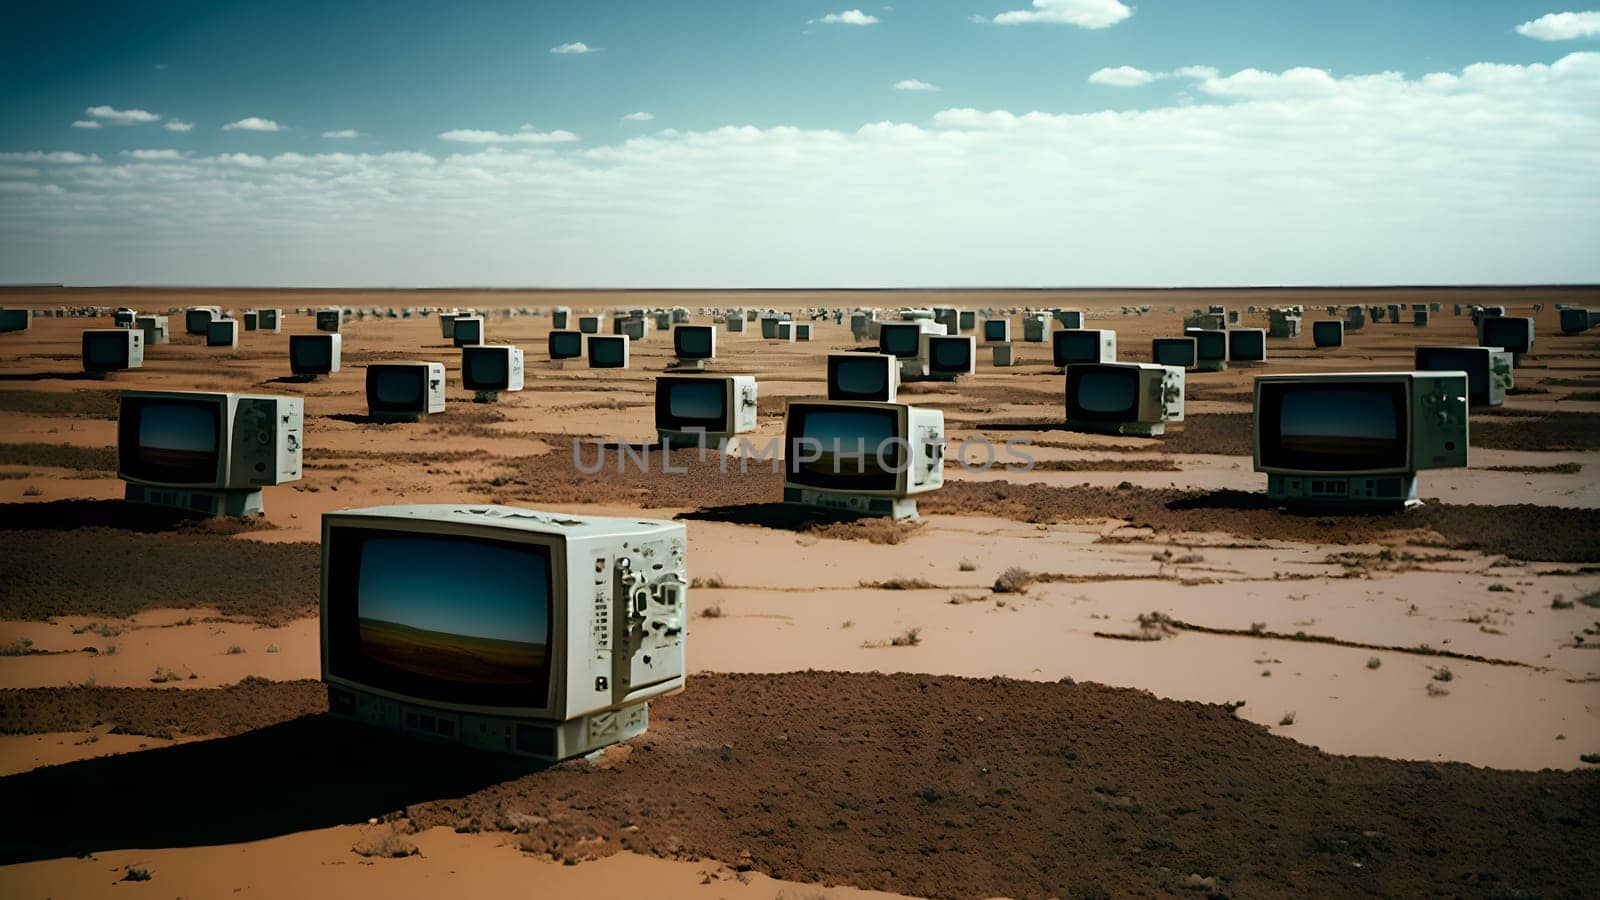 desert covered with old analog tv sets at summer daylight, neural network generated art by z1b